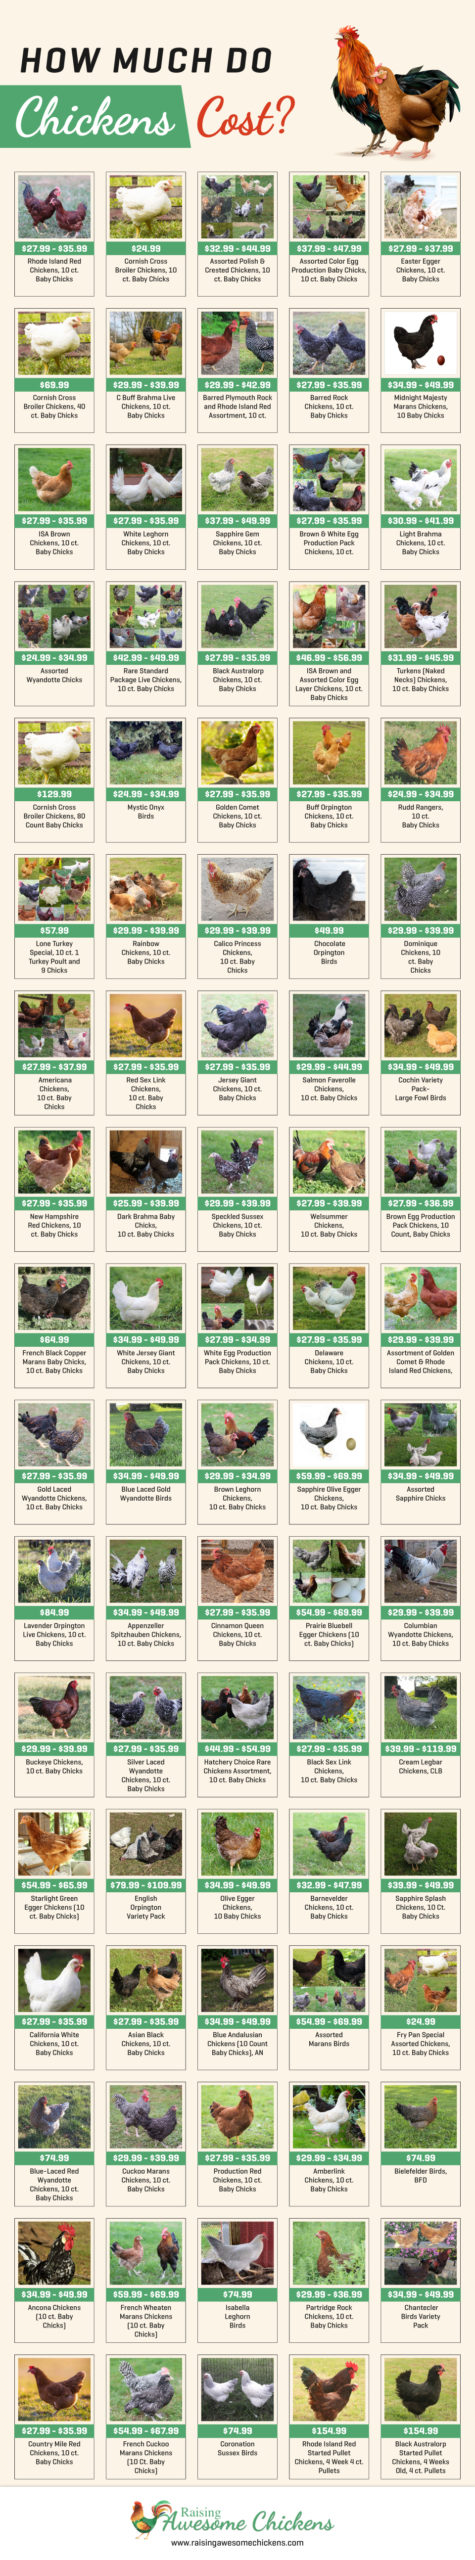 How Much do Chickens Cost INFOGRAPHIC